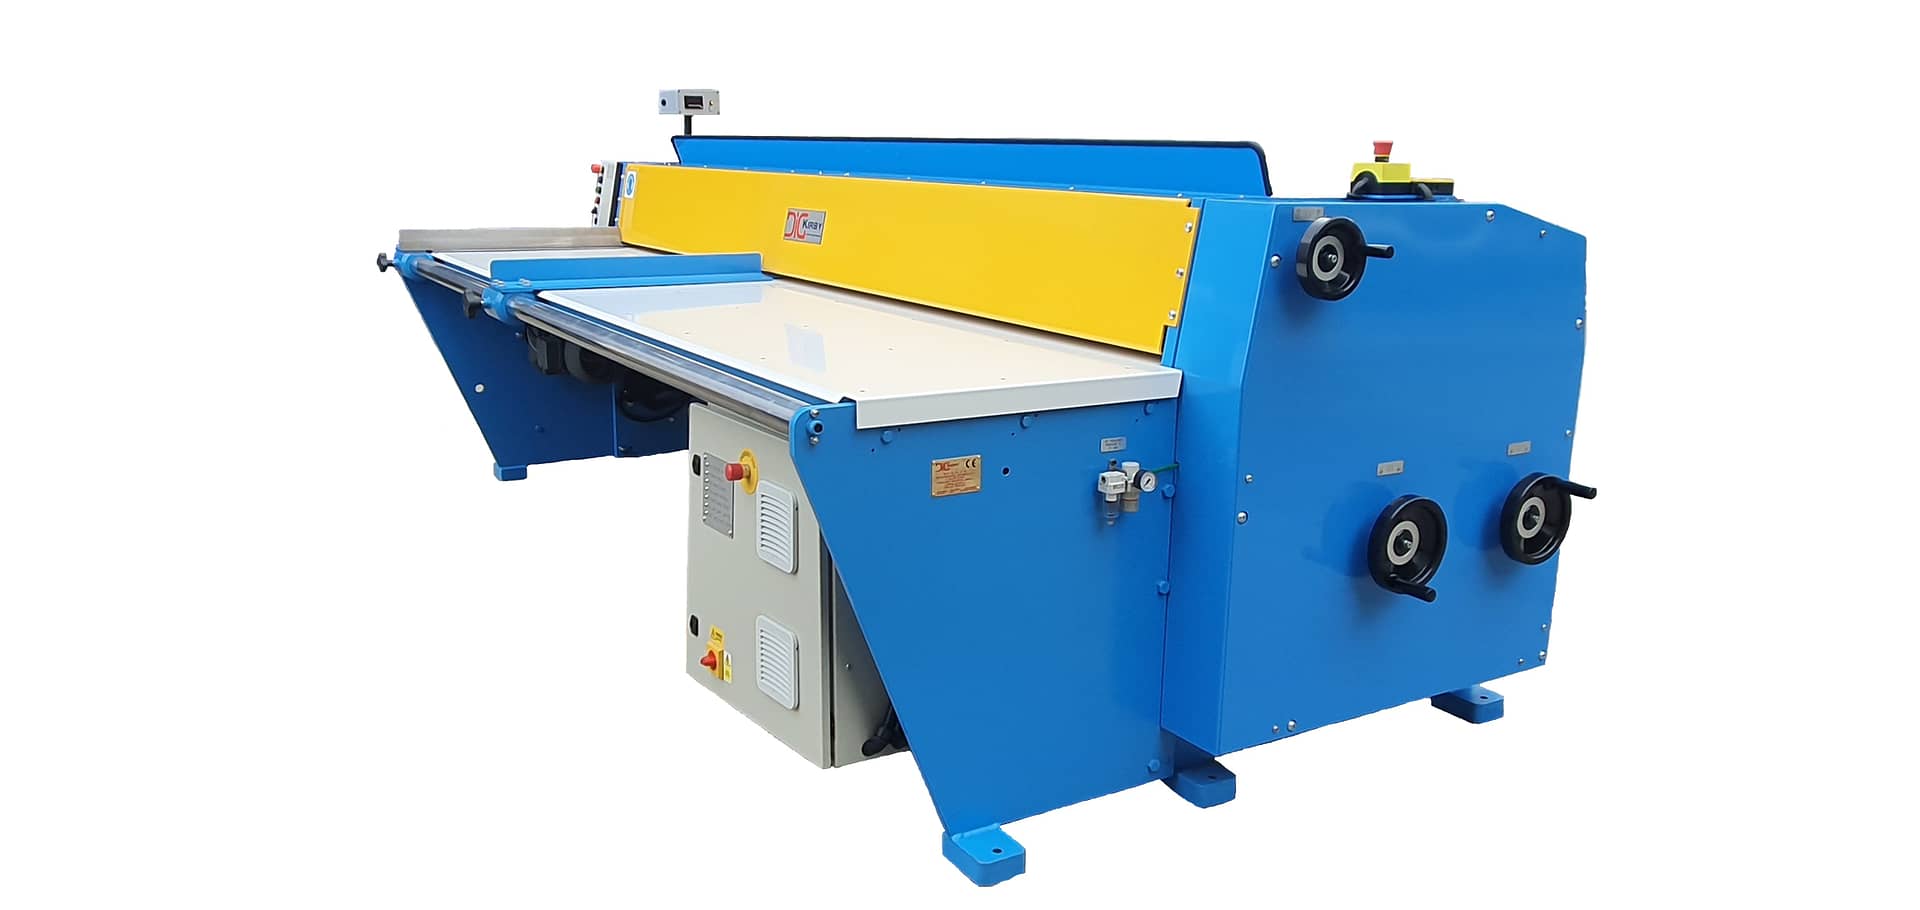 UK Specialists in Kirby Slitter Creaser with Digital Rule Bars